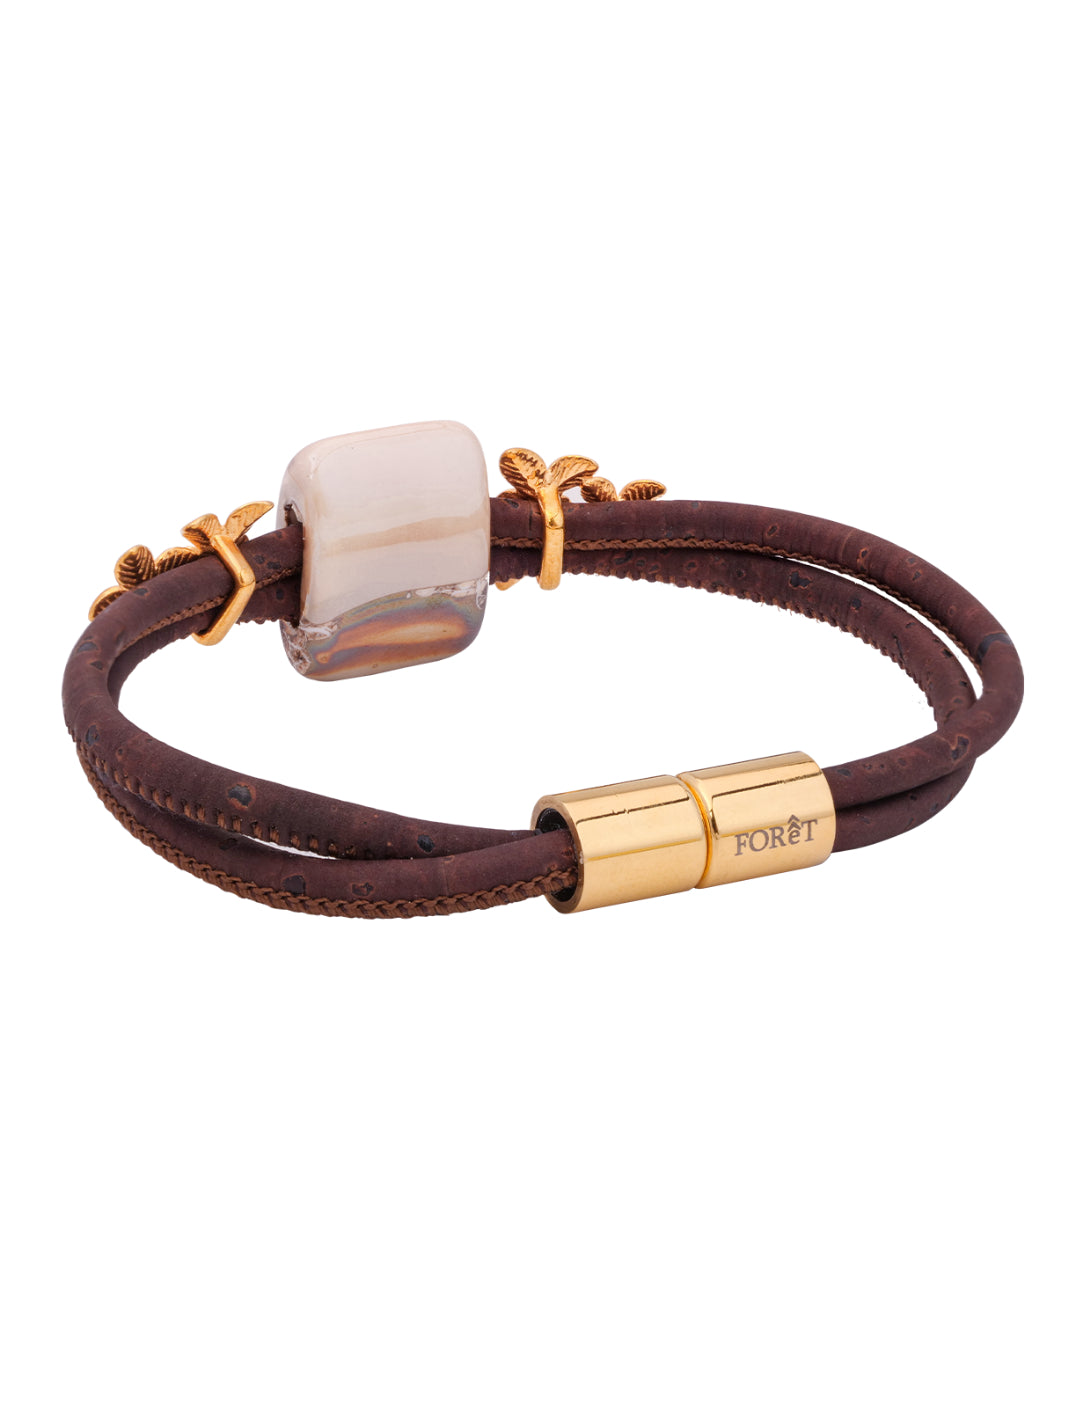 Introducing the IBERIS Cork Bracelet: where sustainable cork meets contemporary elegance. Lightweight, with a magnetic clasp for easy wear, adorned with floral motifs and ceramic stones. Stylish, eco-conscious jewelry.